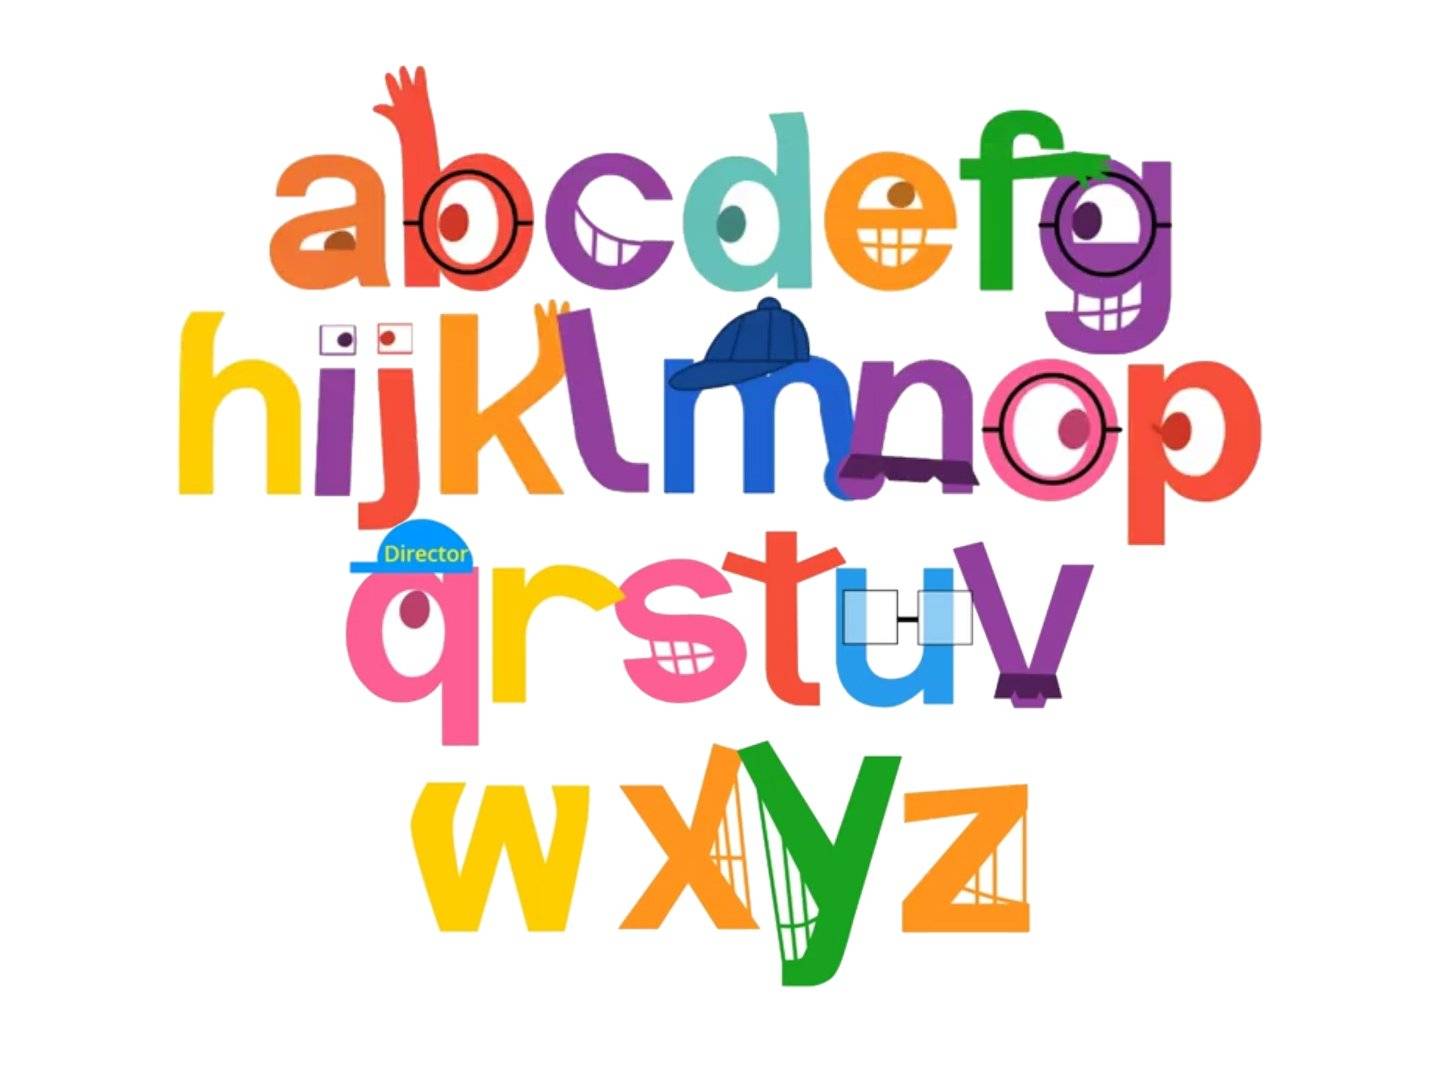 The JUMPSTART LETTERS But It's A Alphabet Song? by TheBobby65 on